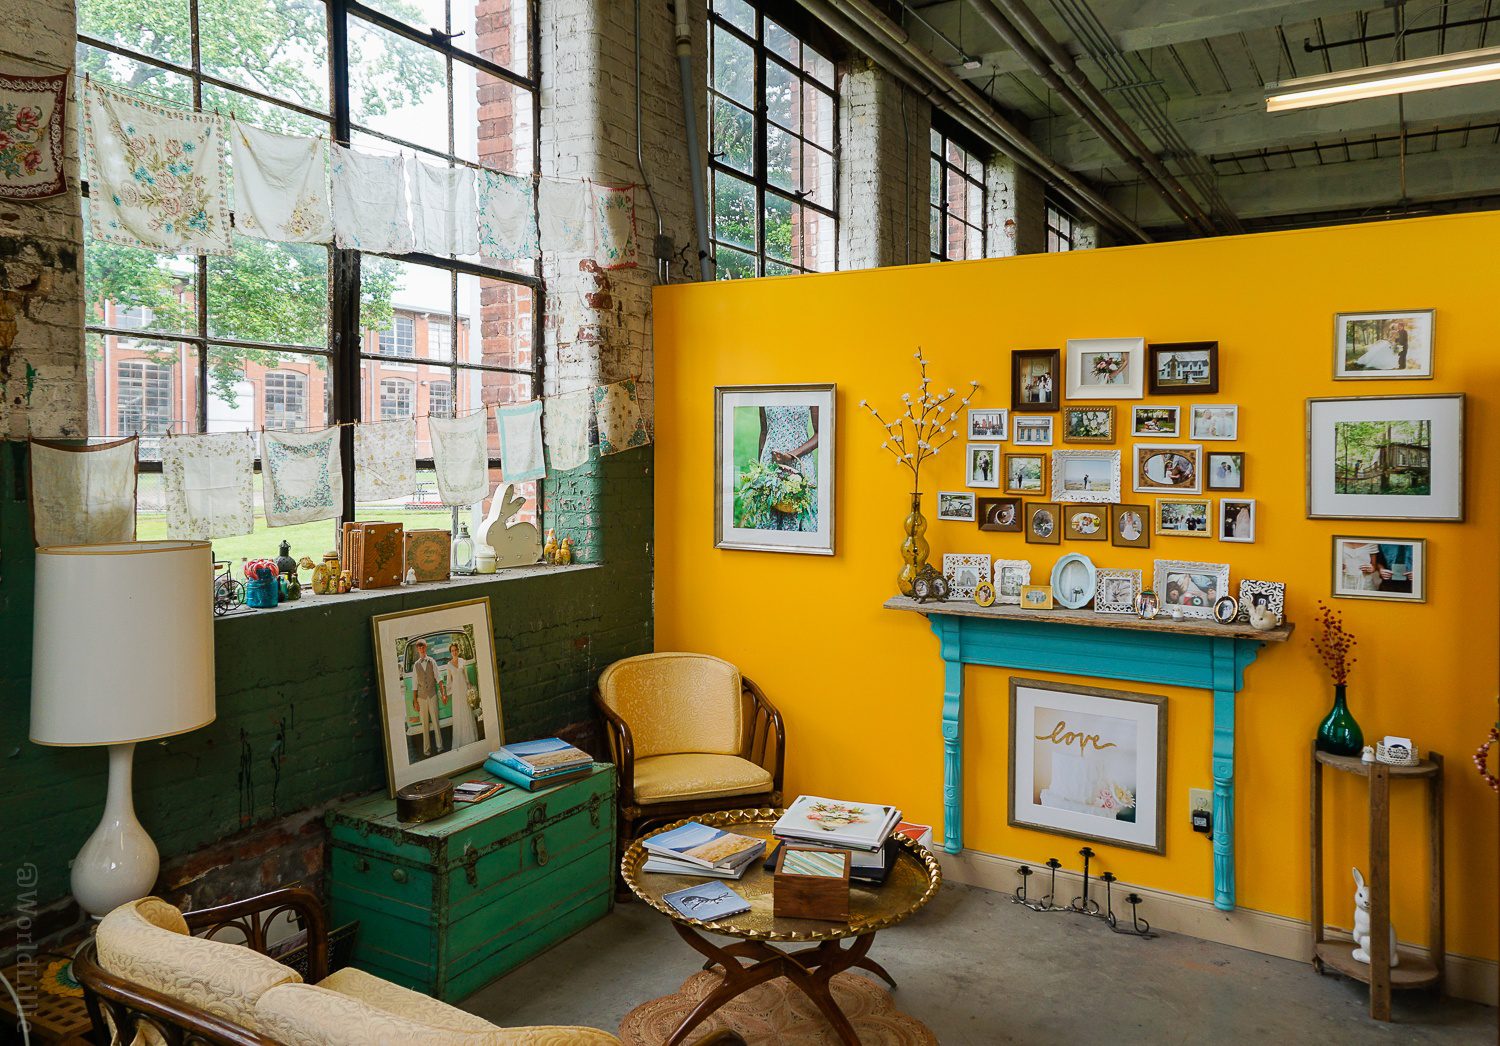 These artists give inspiration for how to decorate rooms, eh?